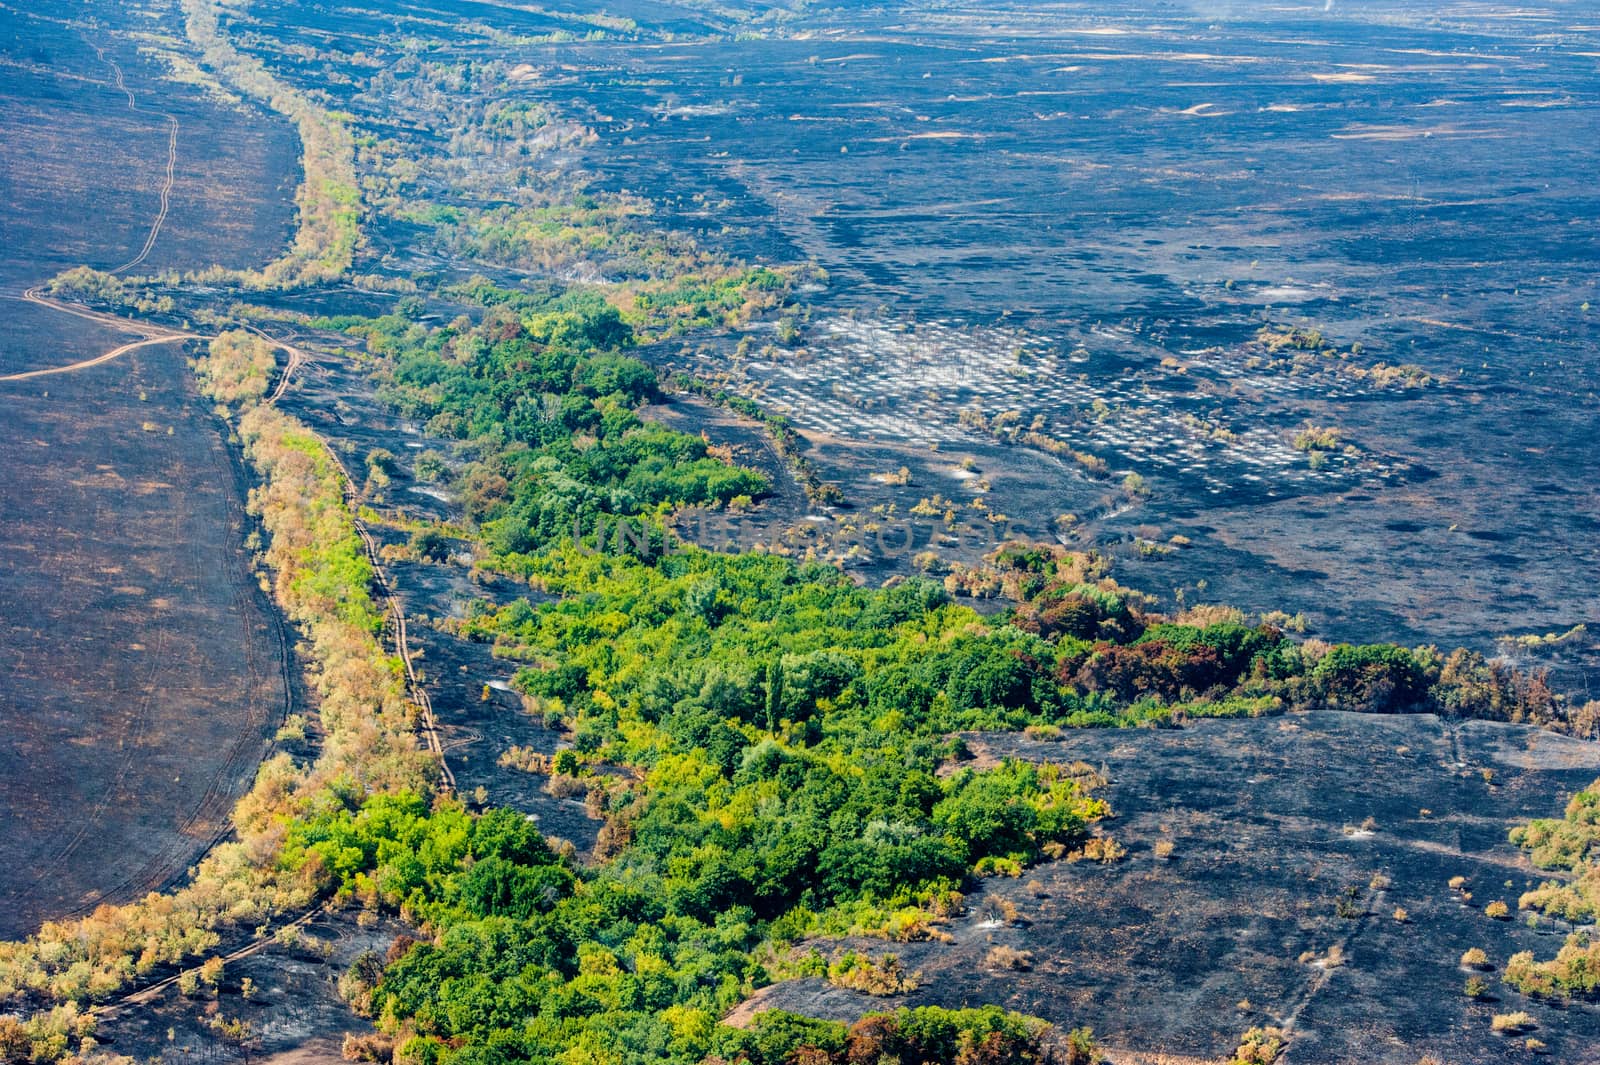 Scorched trees and grass after the fire. Aerial view. Landscape